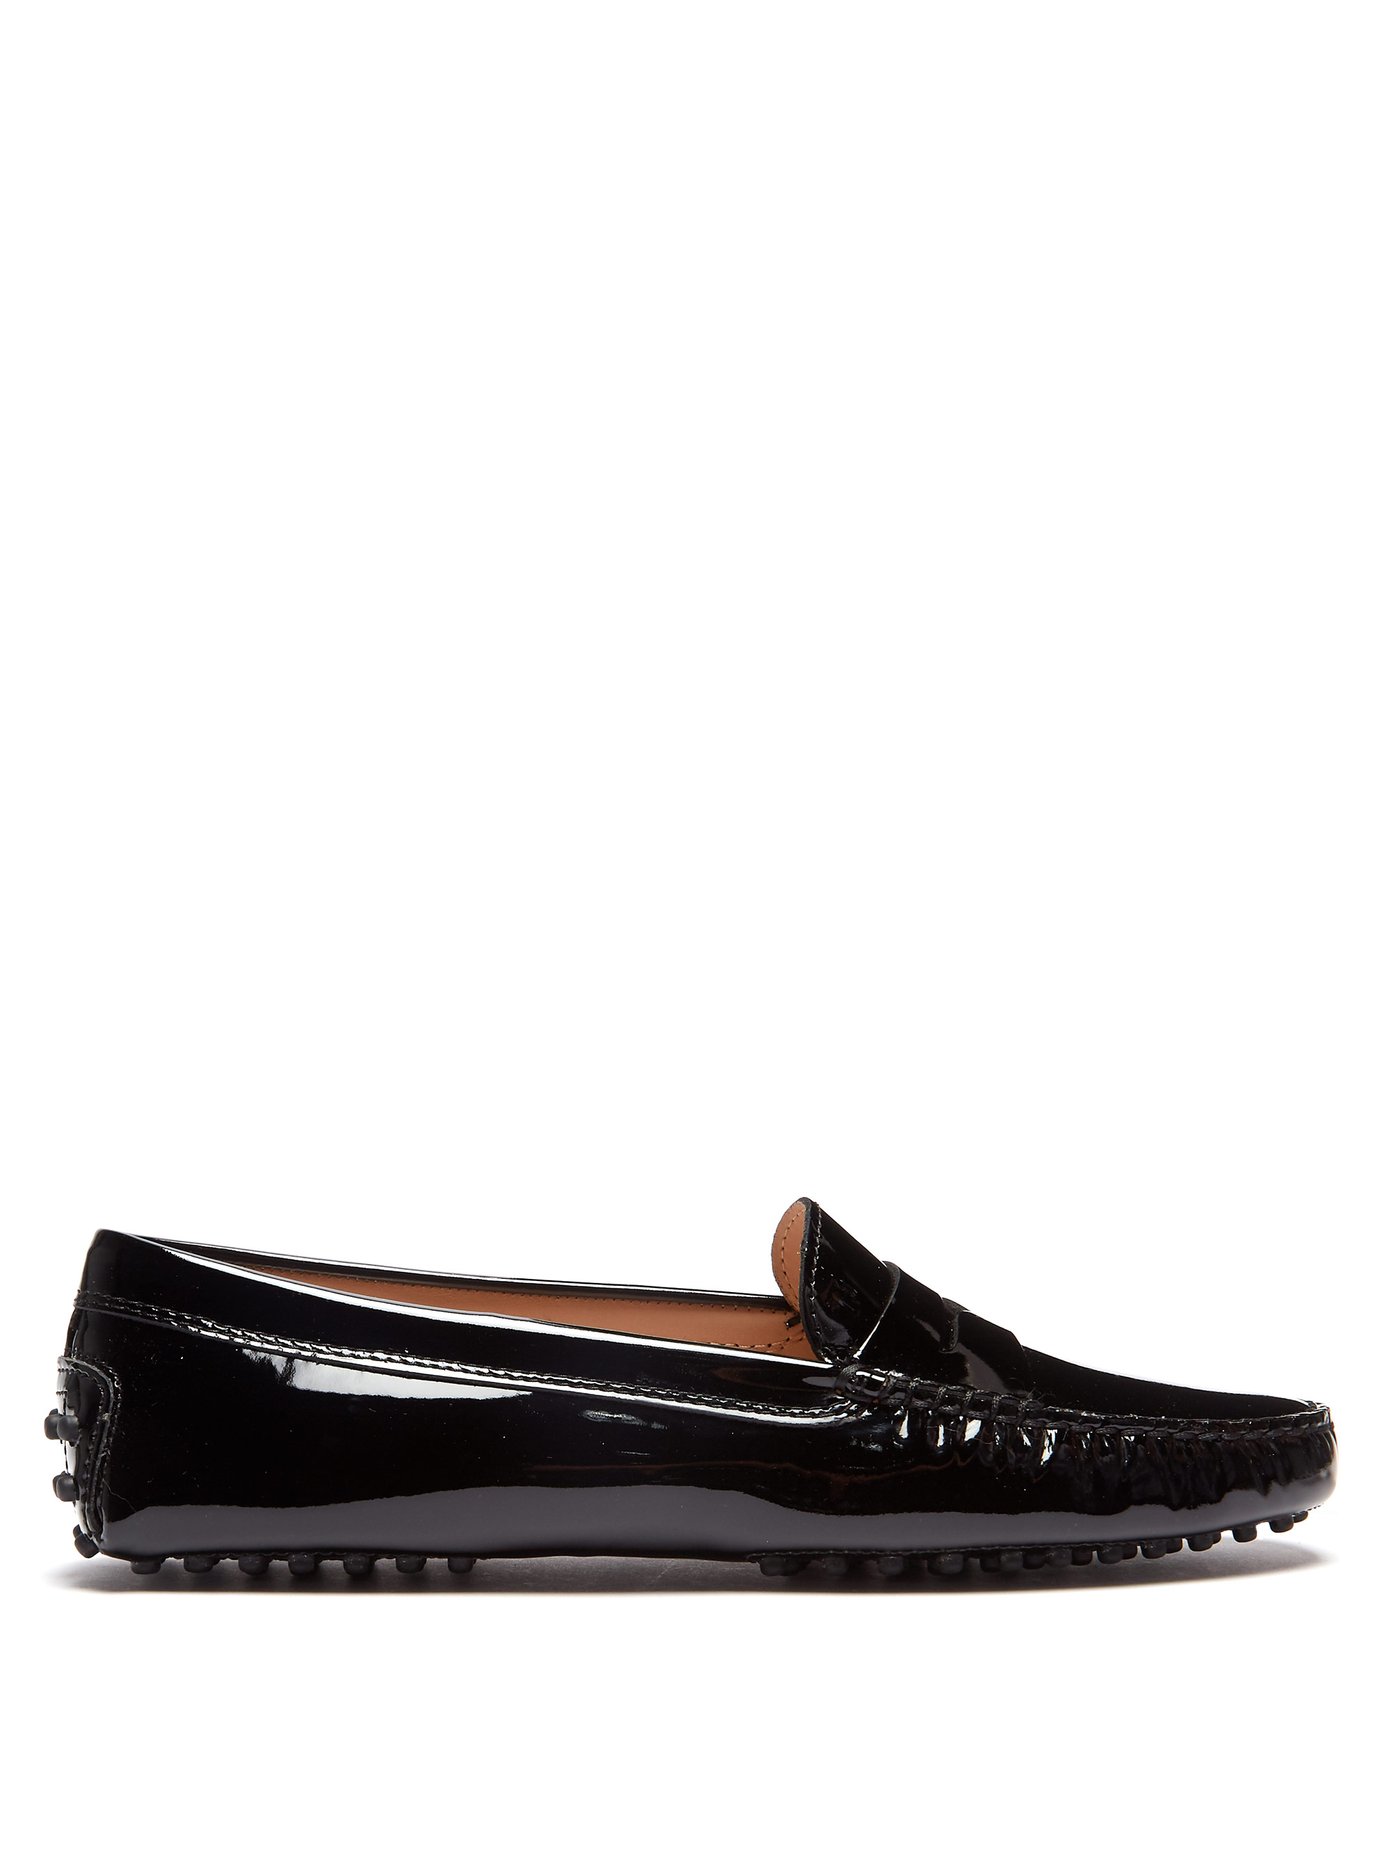 tod's patent leather shoes